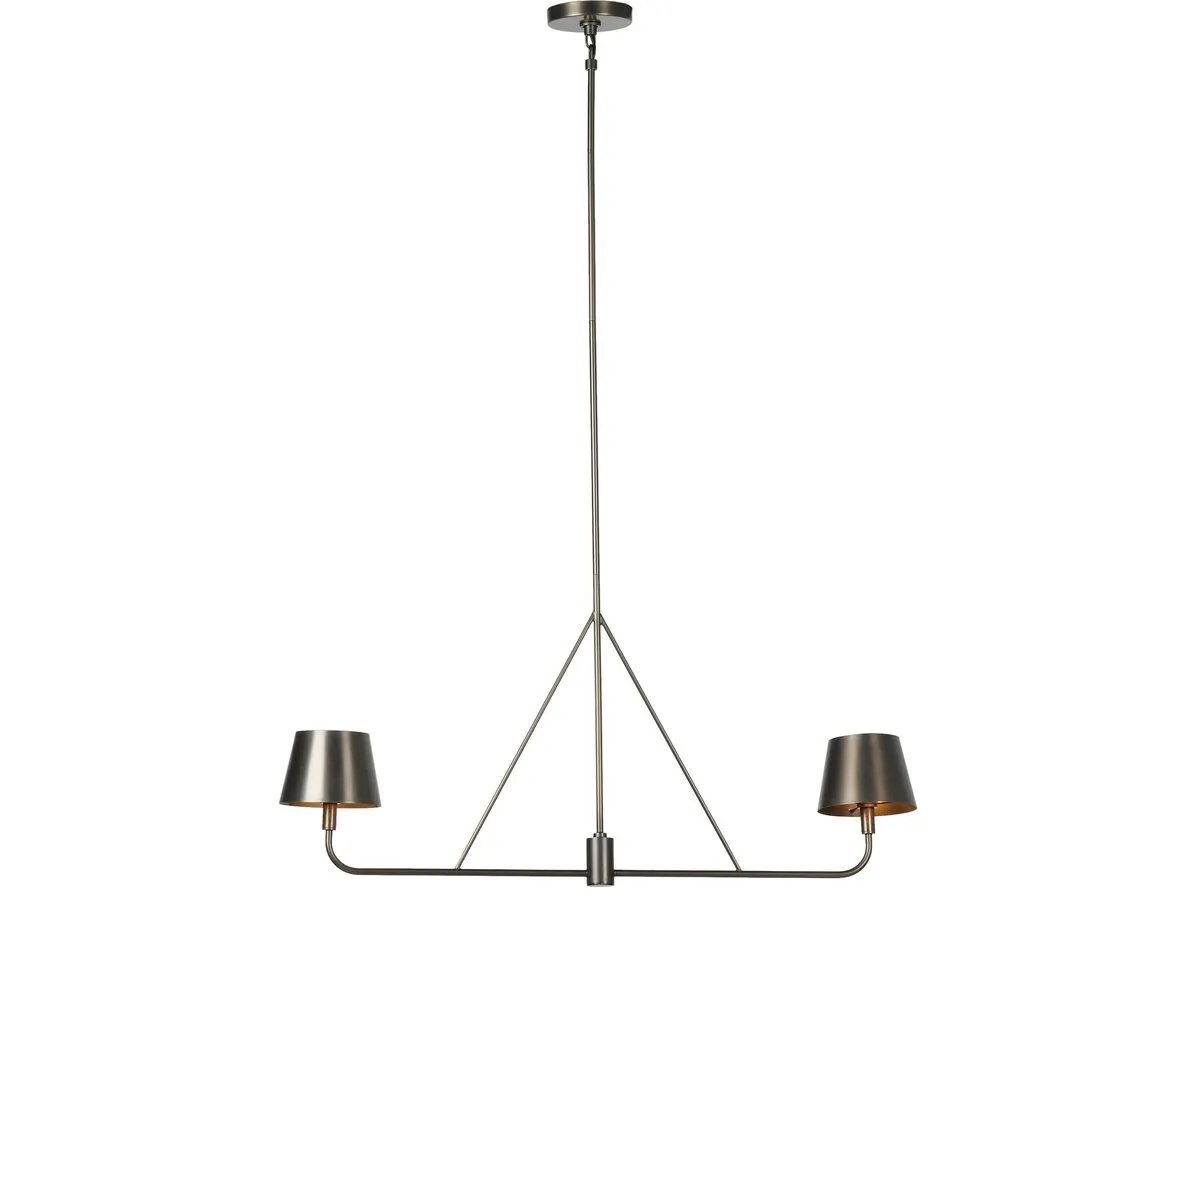 A linear chandelier reinterprets a classic design with its modern, structured lines. Crafted from iron and refreshed with a dark antique finish.Collection: Camde Amethyst Home provides interior design, new home construction design consulting, vintage area rugs, and lighting in the Miami metro area.